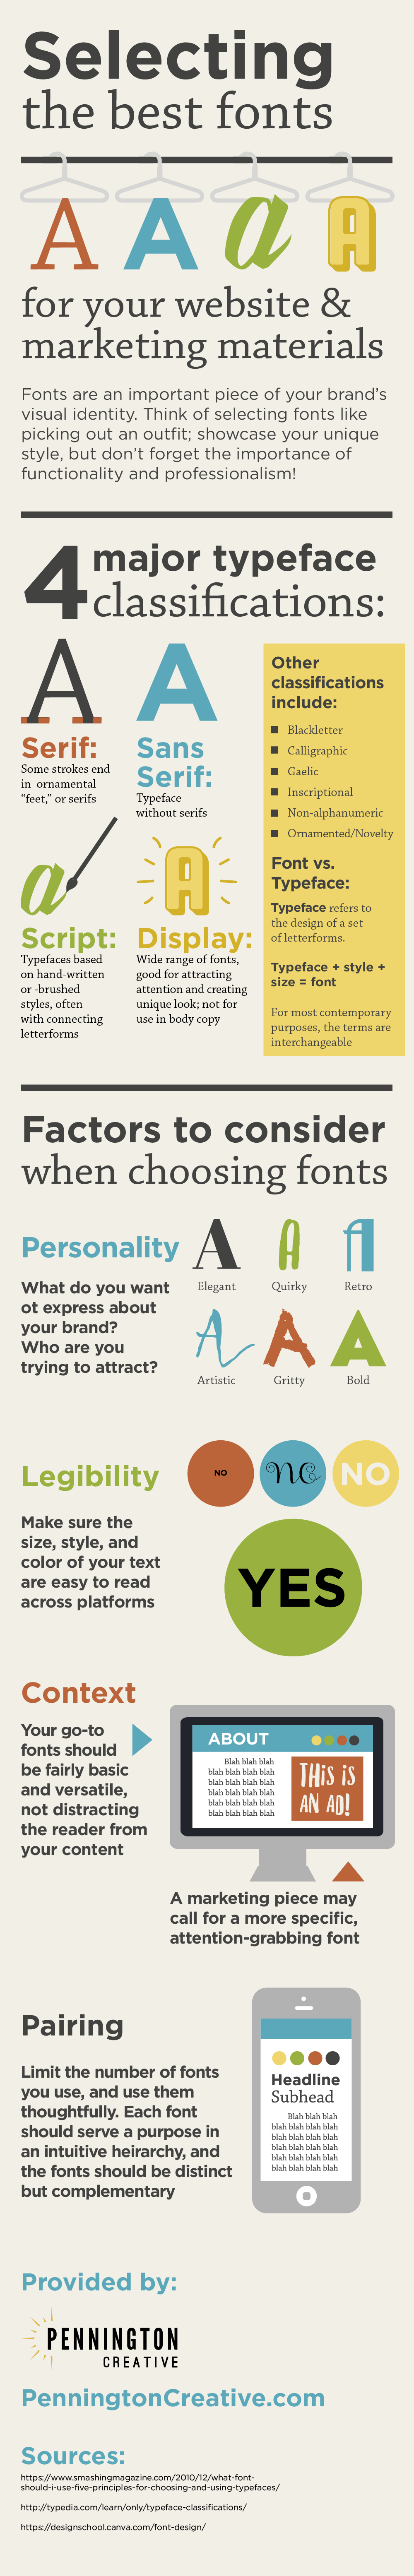 Selecting the Best Fonts for Your Website and Marketing Materials - #infographic